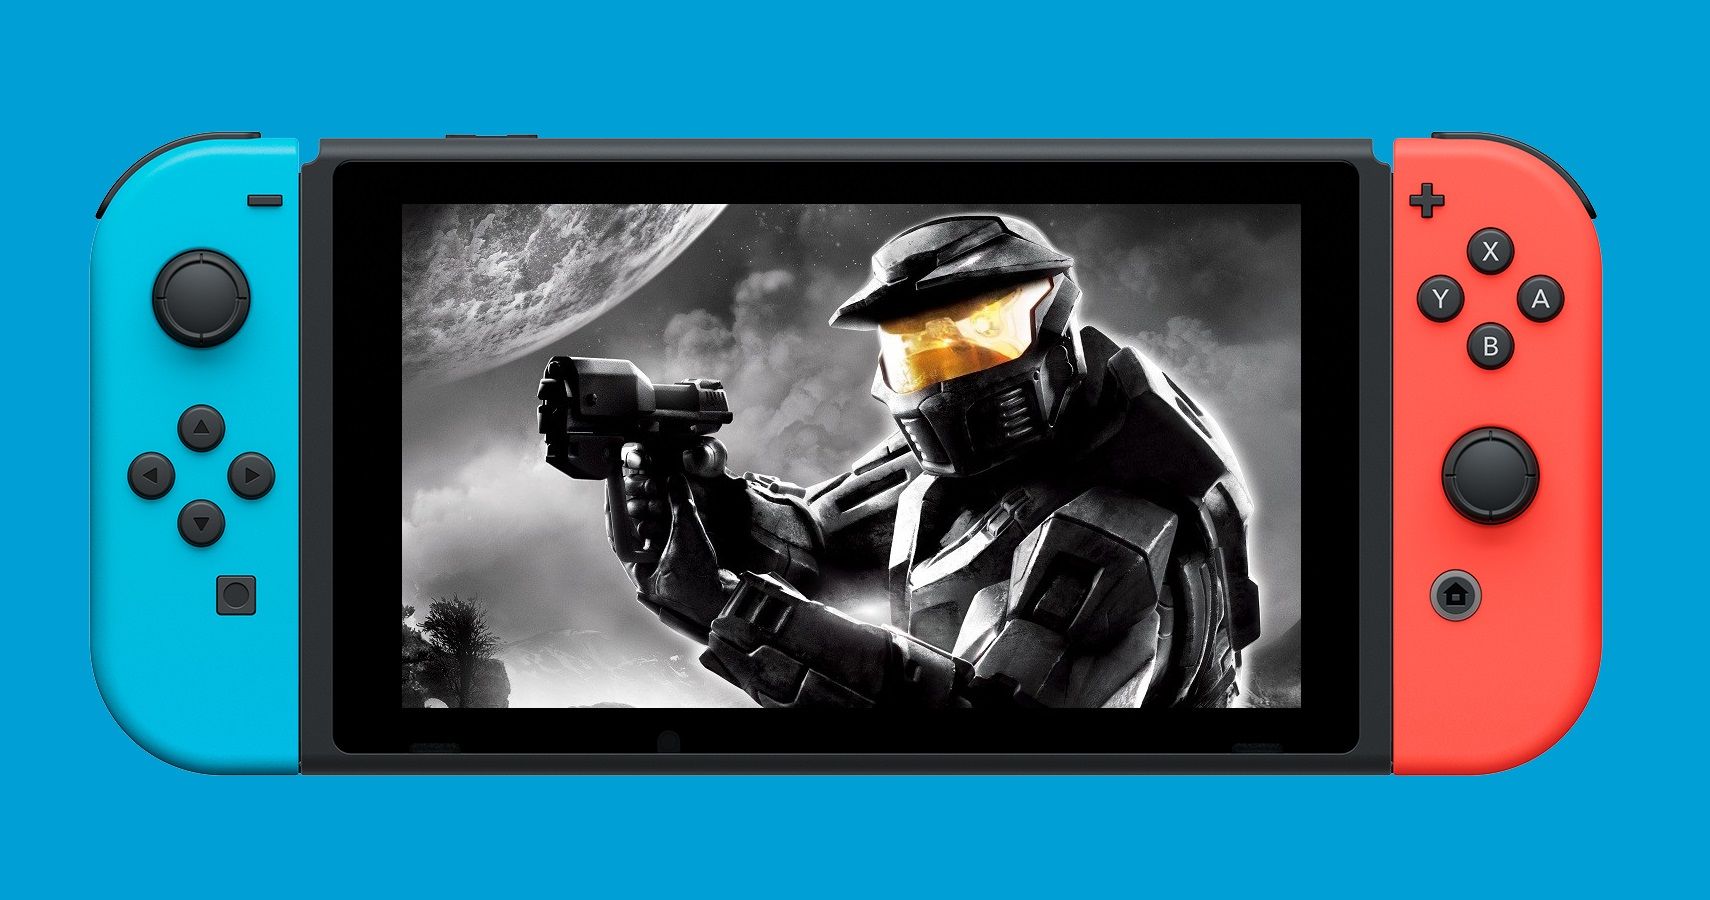 will halo come to nintendo switch